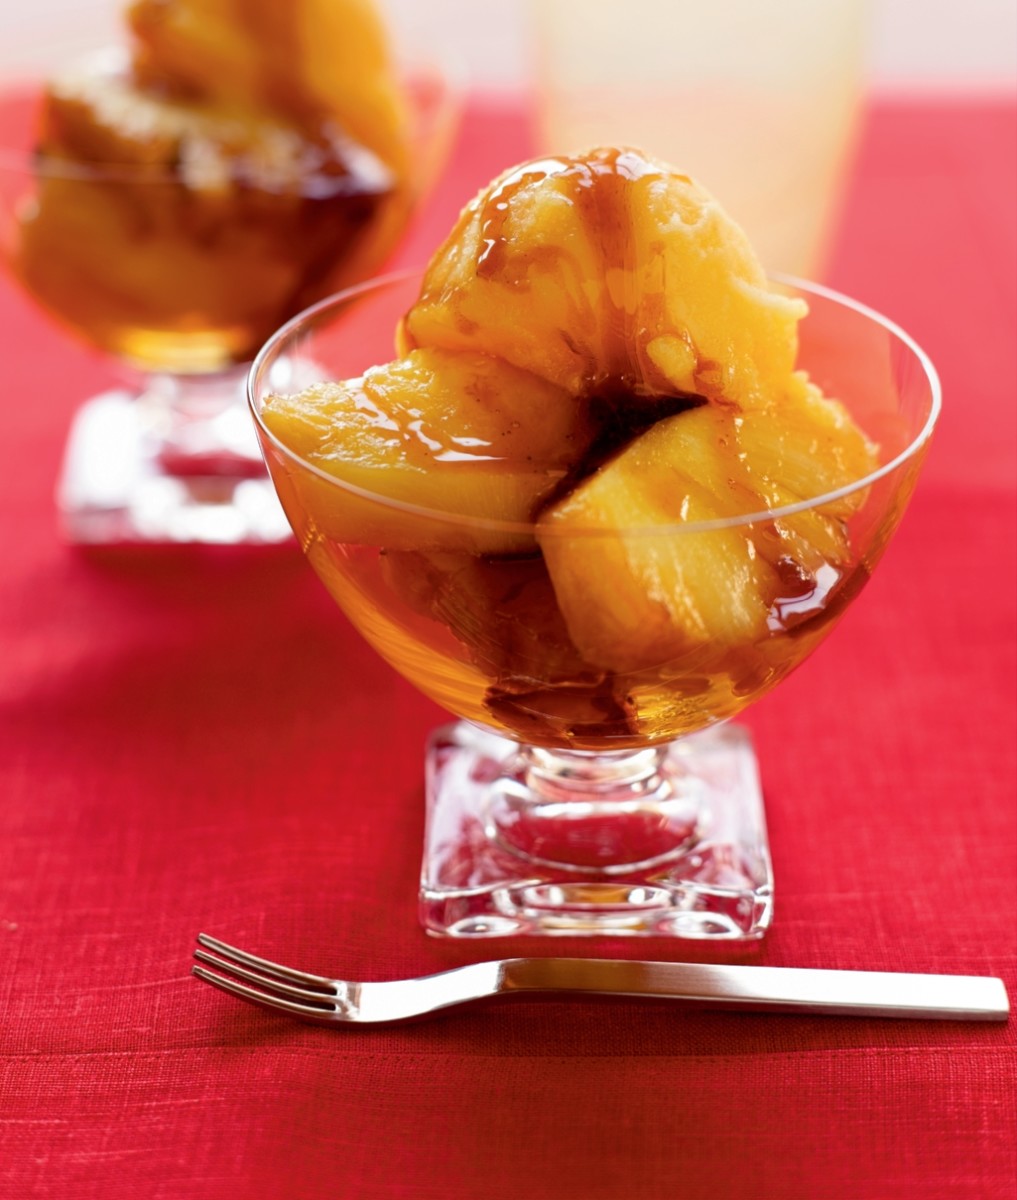 Roasted Pineapple with Pineapple sorbet